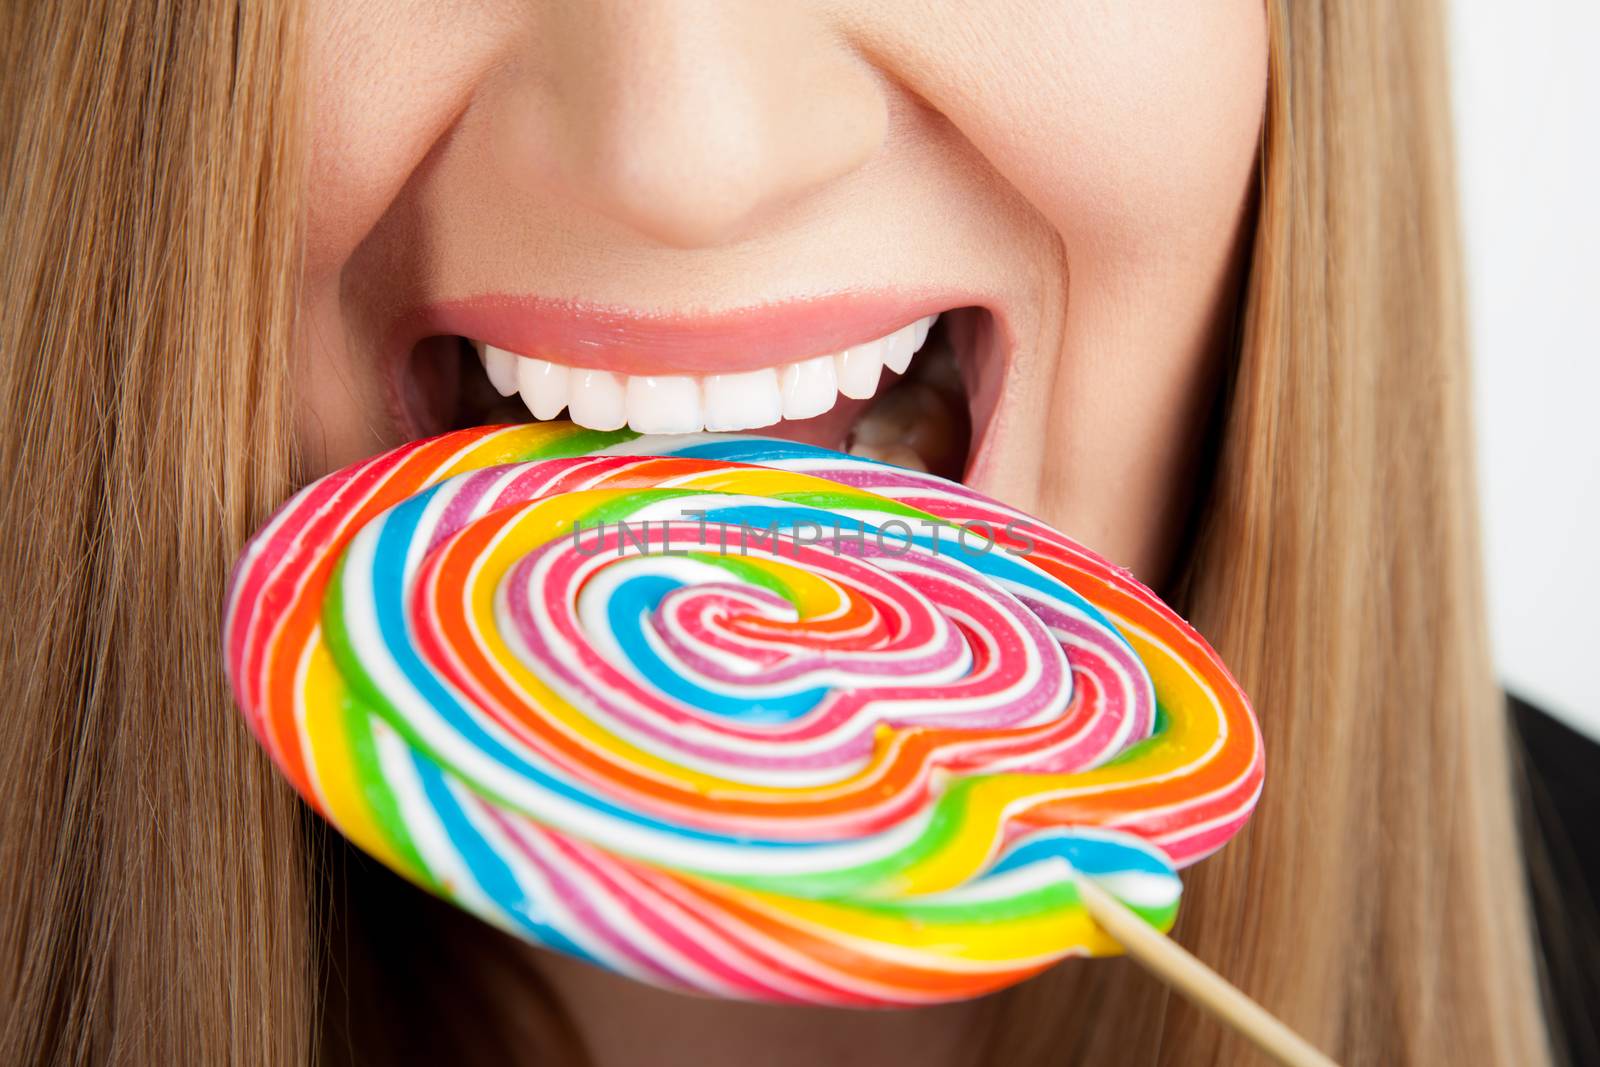 A close-up of a female mouth wide open going to take a bite of a big colorful spiral lollipop.